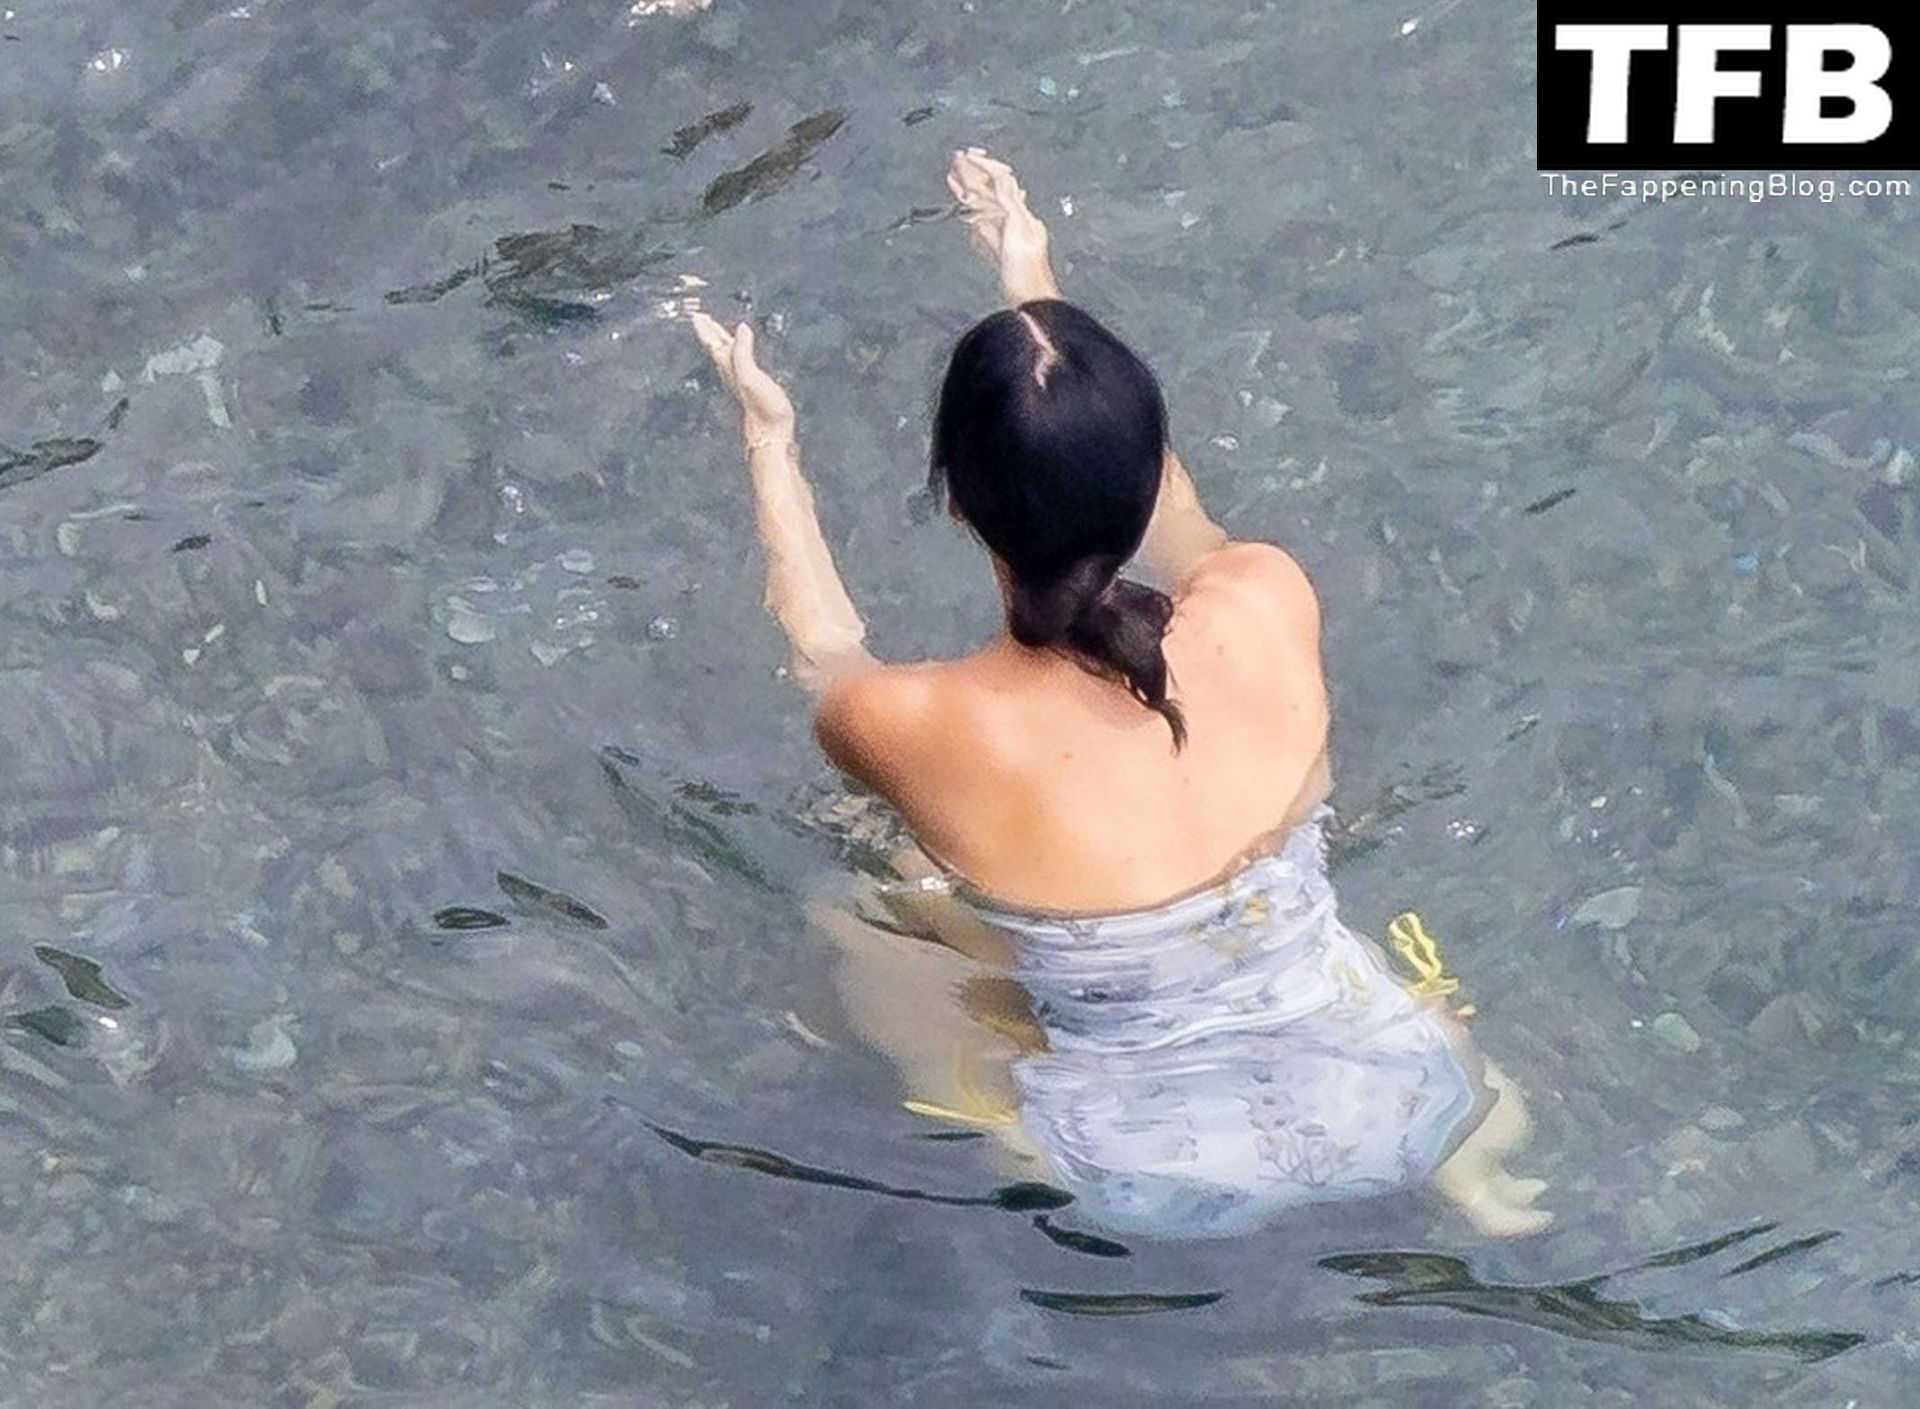 Katy Perry Sexy The Fappening Blog 14 - Katy Perry Rocks a Strapless Swimsuit While Enjoying a Beach Day with Orlando Bloom in Positano (105 Photos)